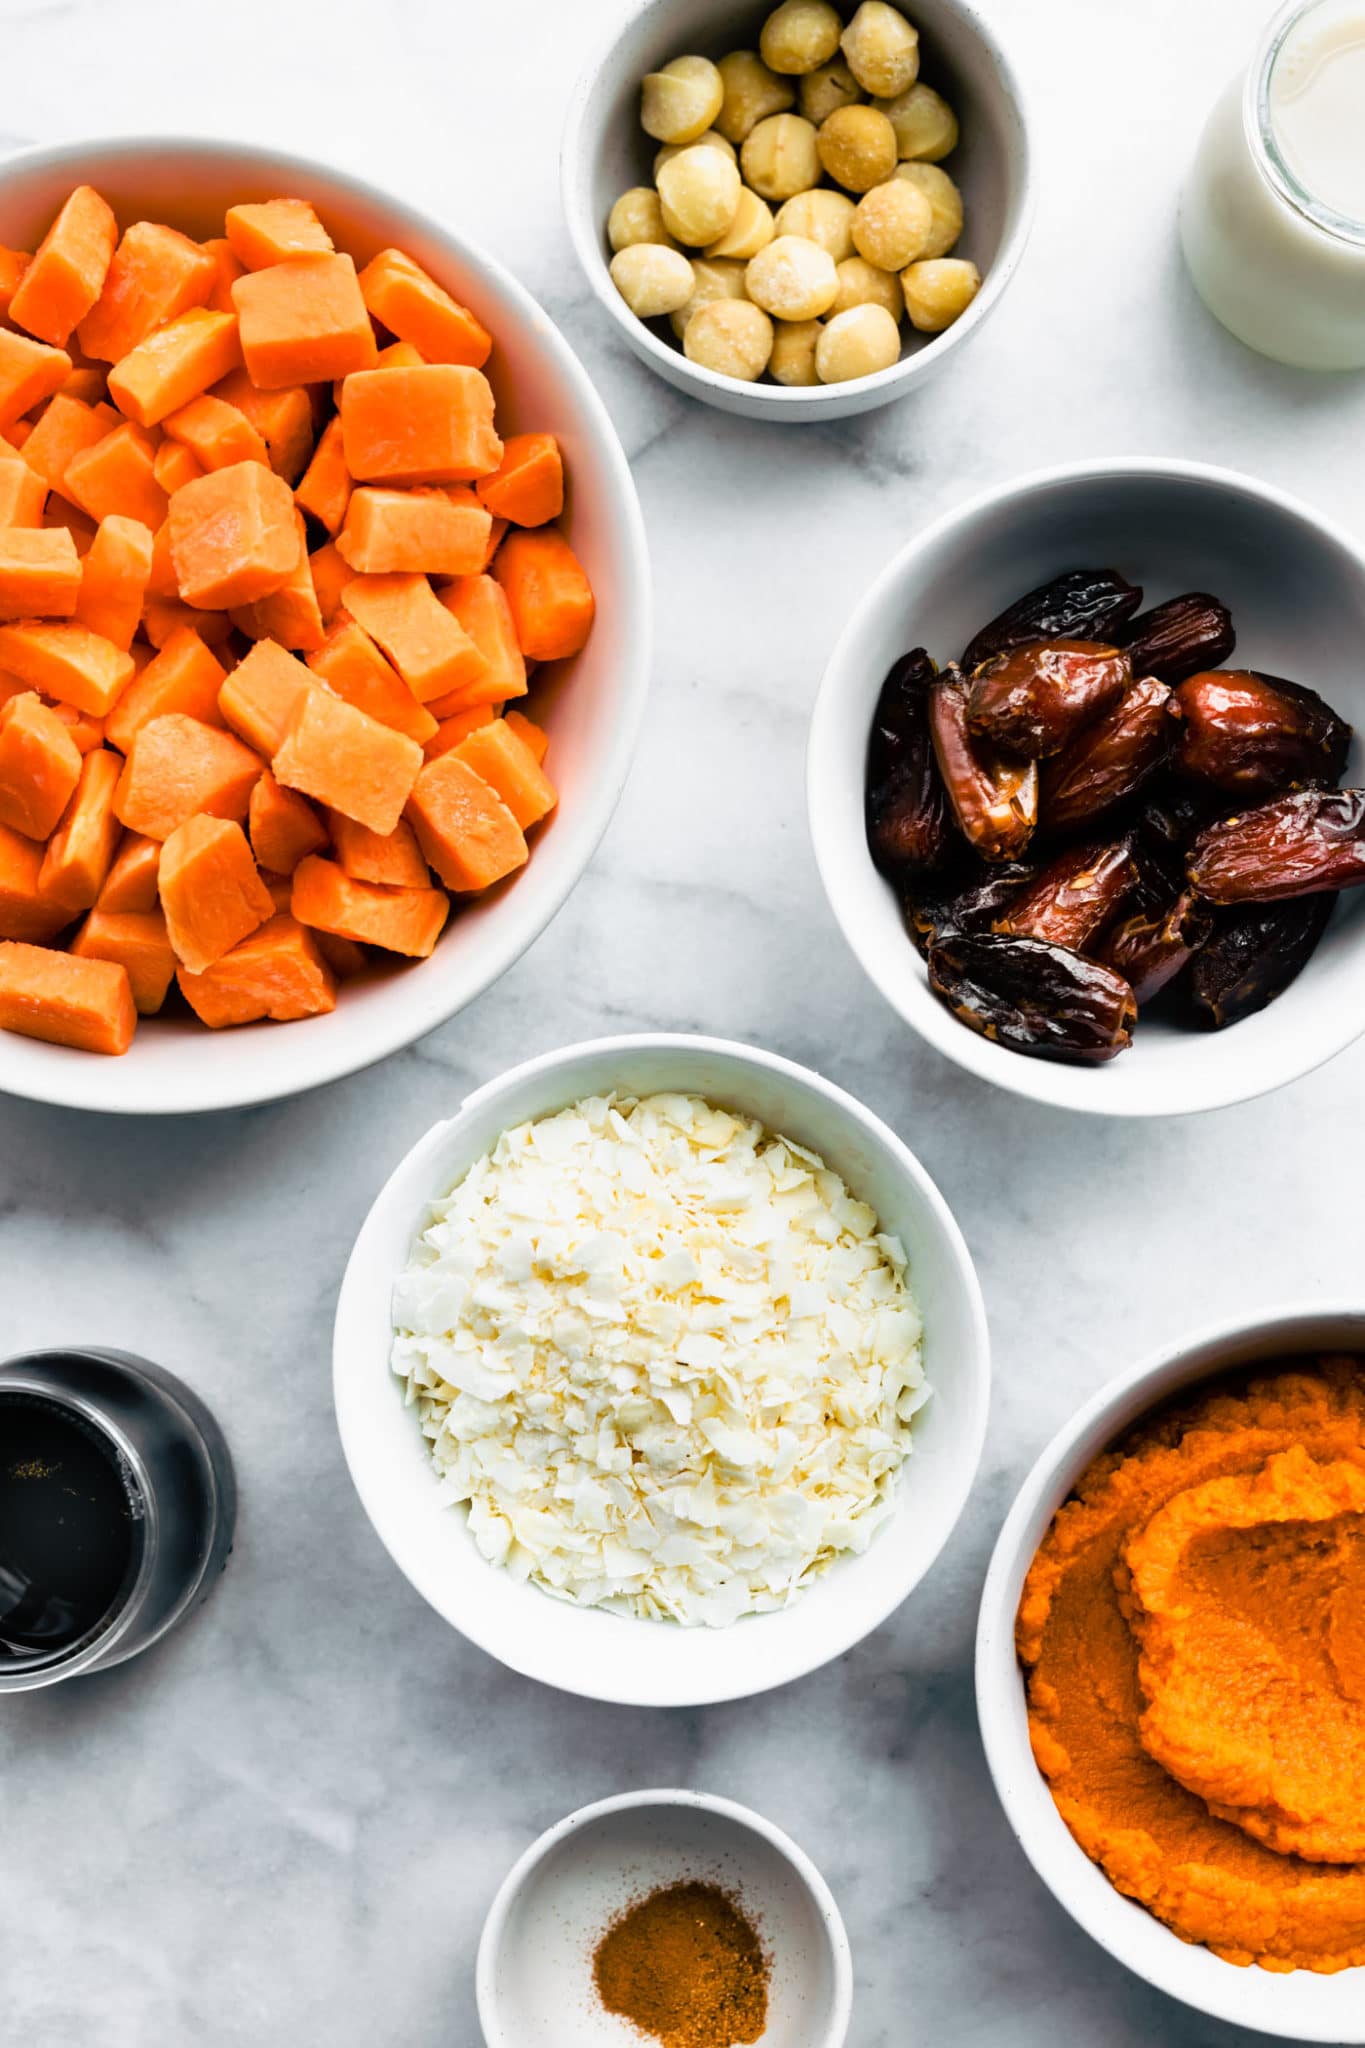 Ingredients for vegan sweet potato casserole in small white bowls